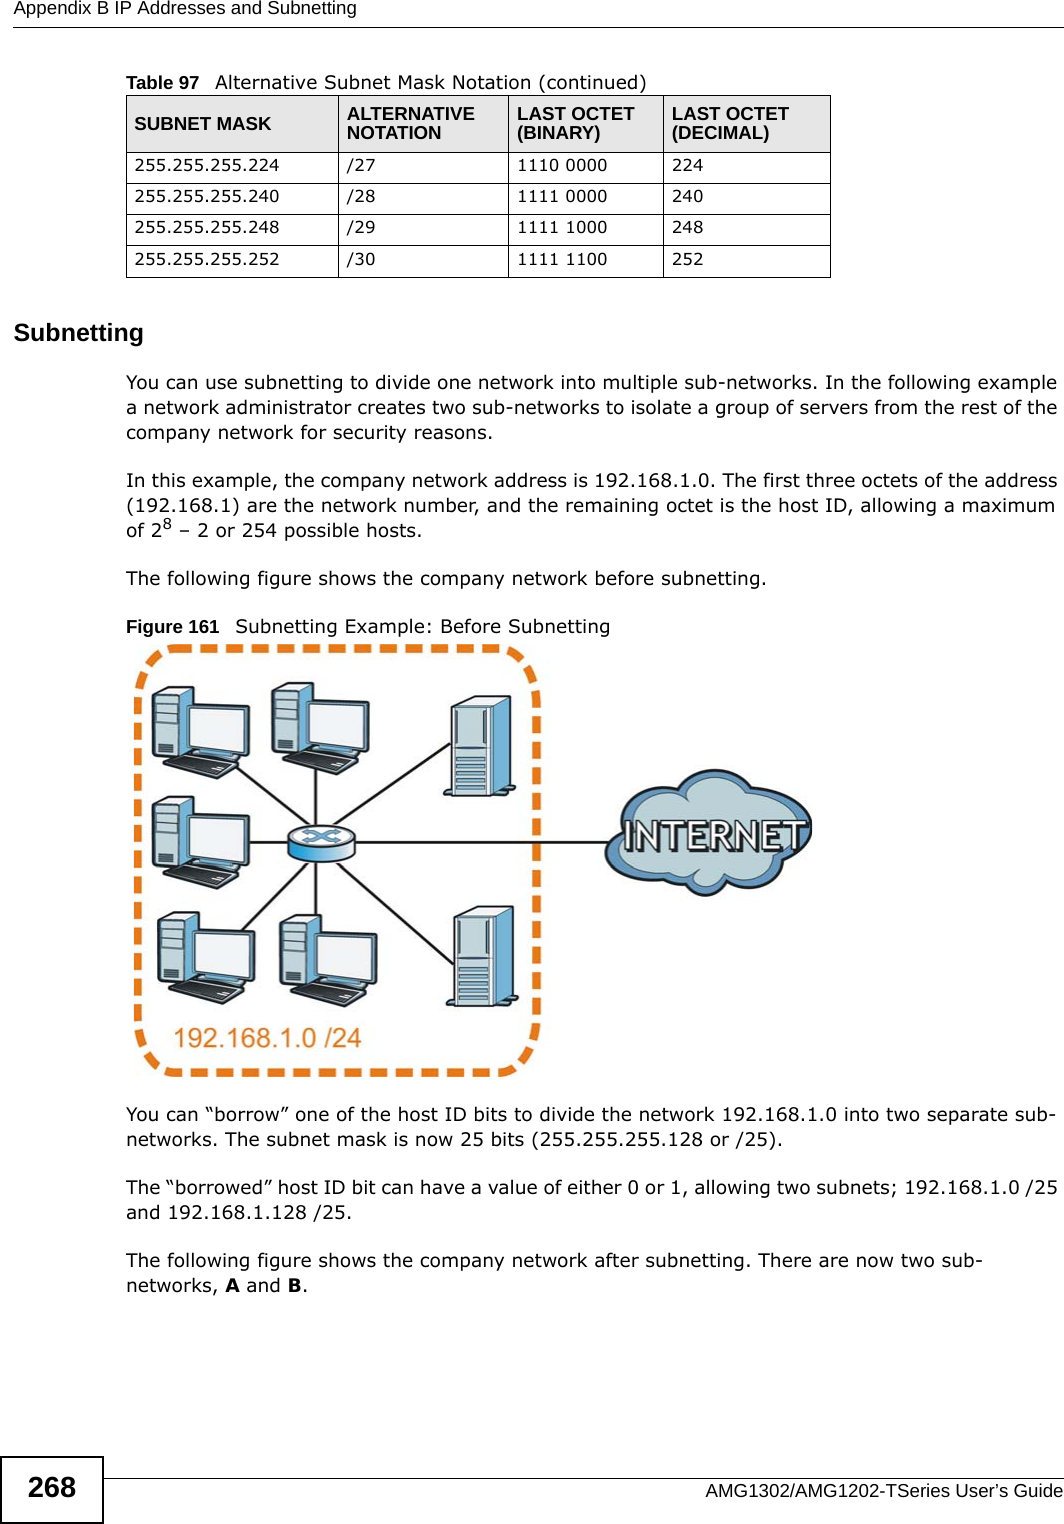 Appendix B IP Addresses and SubnettingAMG1302/AMG1202-TSeries User’s Guide268SubnettingYou can use subnetting to divide one network into multiple sub-networks. In the following example a network administrator creates two sub-networks to isolate a group of servers from the rest of the company network for security reasons.In this example, the company network address is 192.168.1.0. The first three octets of the address (192.168.1) are the network number, and the remaining octet is the host ID, allowing a maximum of 28 – 2 or 254 possible hosts.The following figure shows the company network before subnetting.  Figure 161   Subnetting Example: Before SubnettingYou can “borrow” one of the host ID bits to divide the network 192.168.1.0 into two separate sub-networks. The subnet mask is now 25 bits (255.255.255.128 or /25).The “borrowed” host ID bit can have a value of either 0 or 1, allowing two subnets; 192.168.1.0 /25 and 192.168.1.128 /25. The following figure shows the company network after subnetting. There are now two sub-networks, A and B. 255.255.255.224 /27 1110 0000 224255.255.255.240 /28 1111 0000 240255.255.255.248 /29 1111 1000 248255.255.255.252 /30 1111 1100 252Table 97   Alternative Subnet Mask Notation (continued)SUBNET MASK ALTERNATIVE NOTATION LAST OCTET (BINARY) LAST OCTET (DECIMAL)